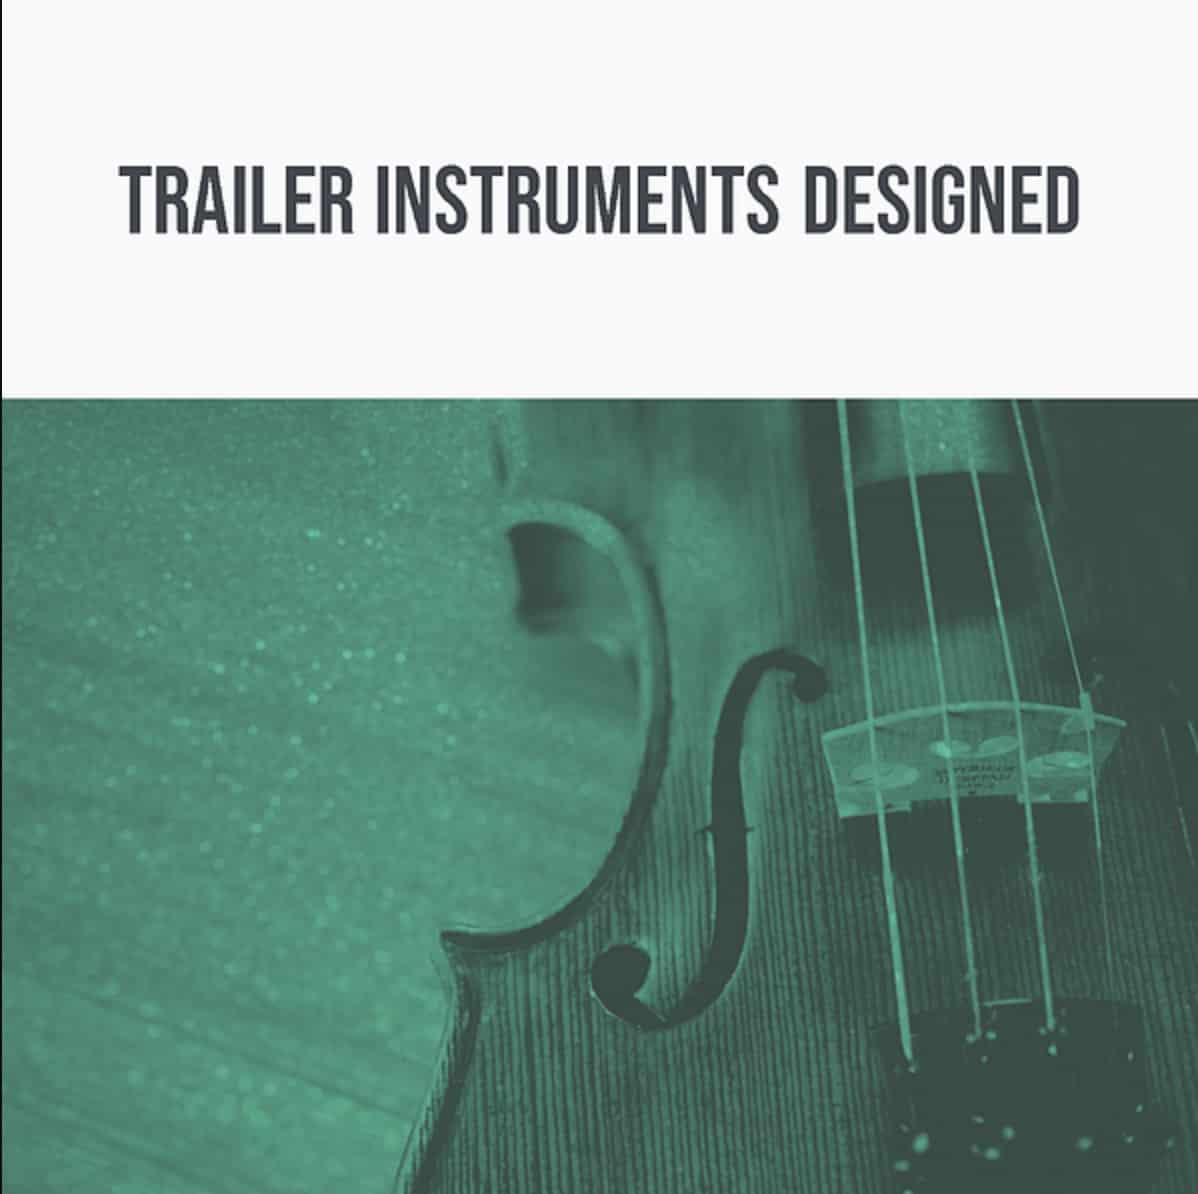 Trailer Instruments Designed for the Abstract Edge